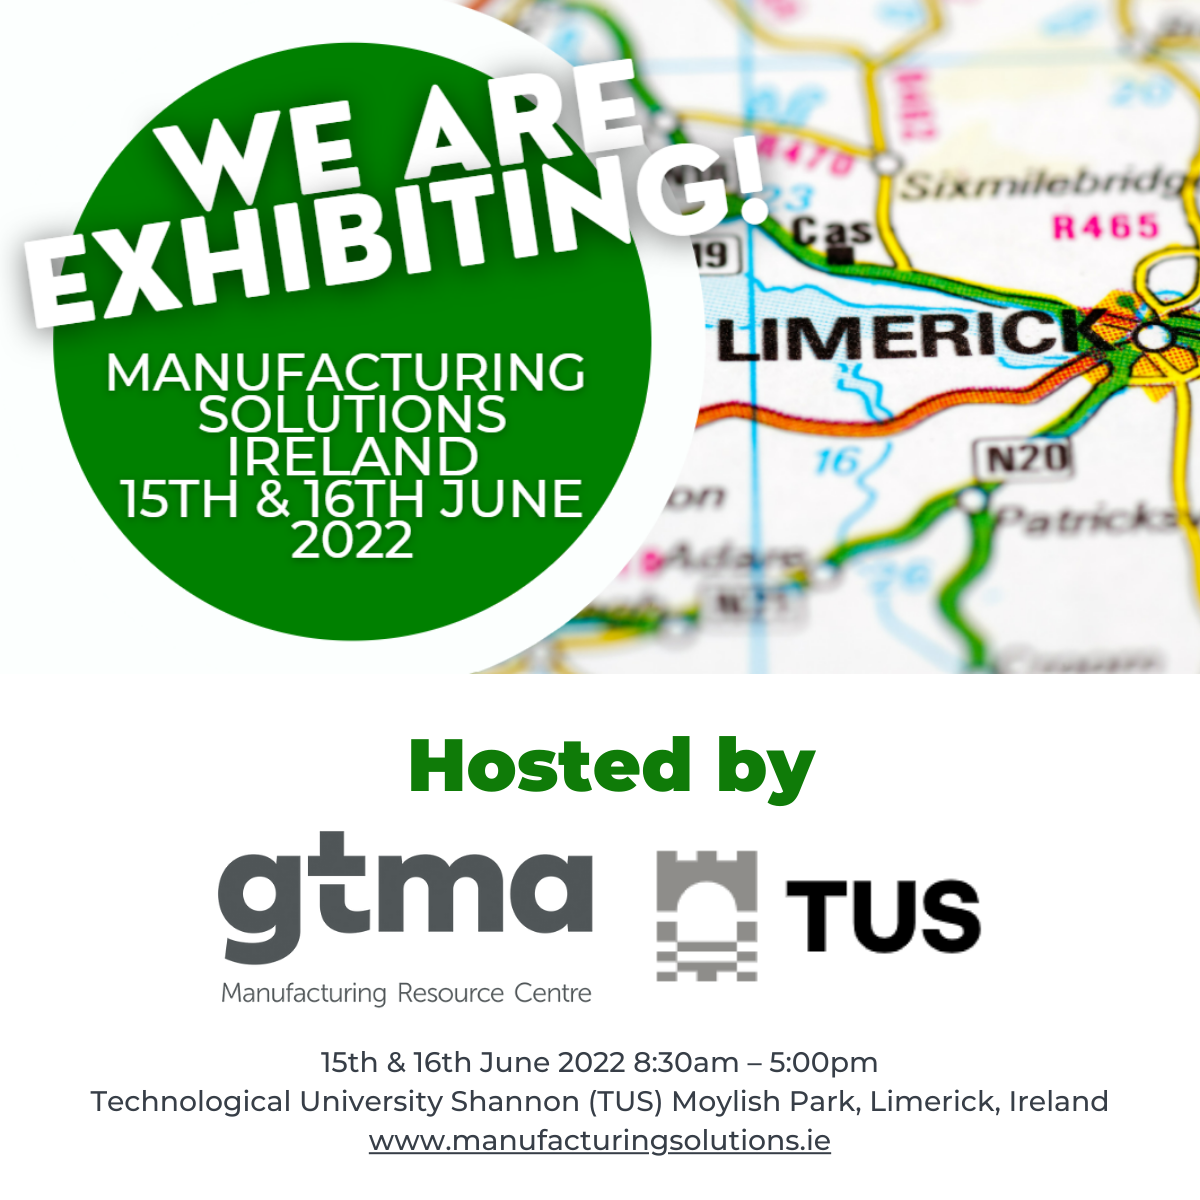 Filtermist to attend GTMA’s Manufacturing Solutions event